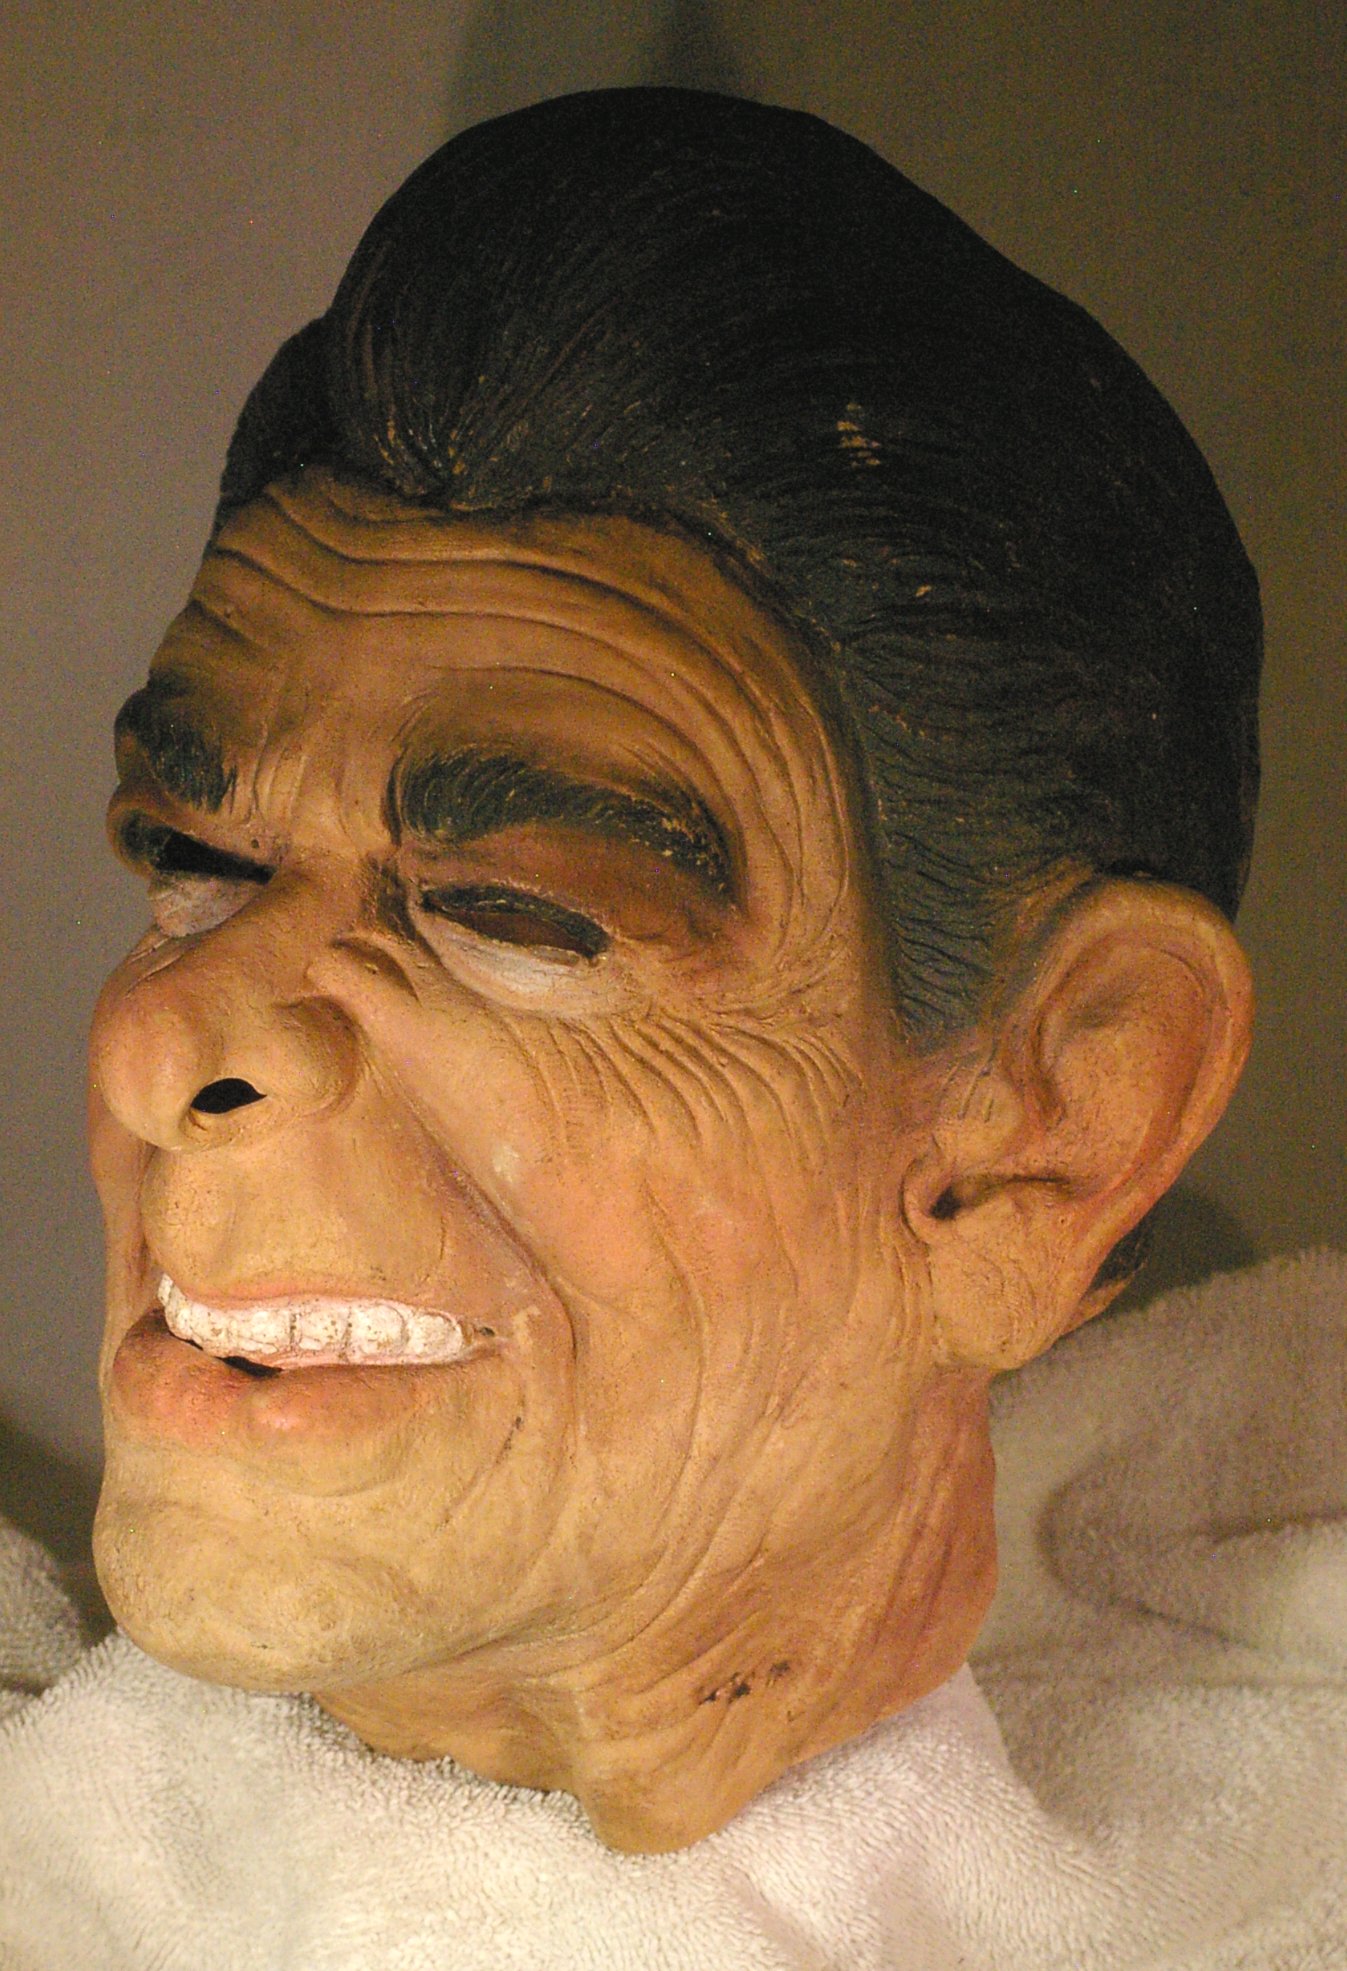 Ronald Reagan Rubber Halloween Mask from 1980's